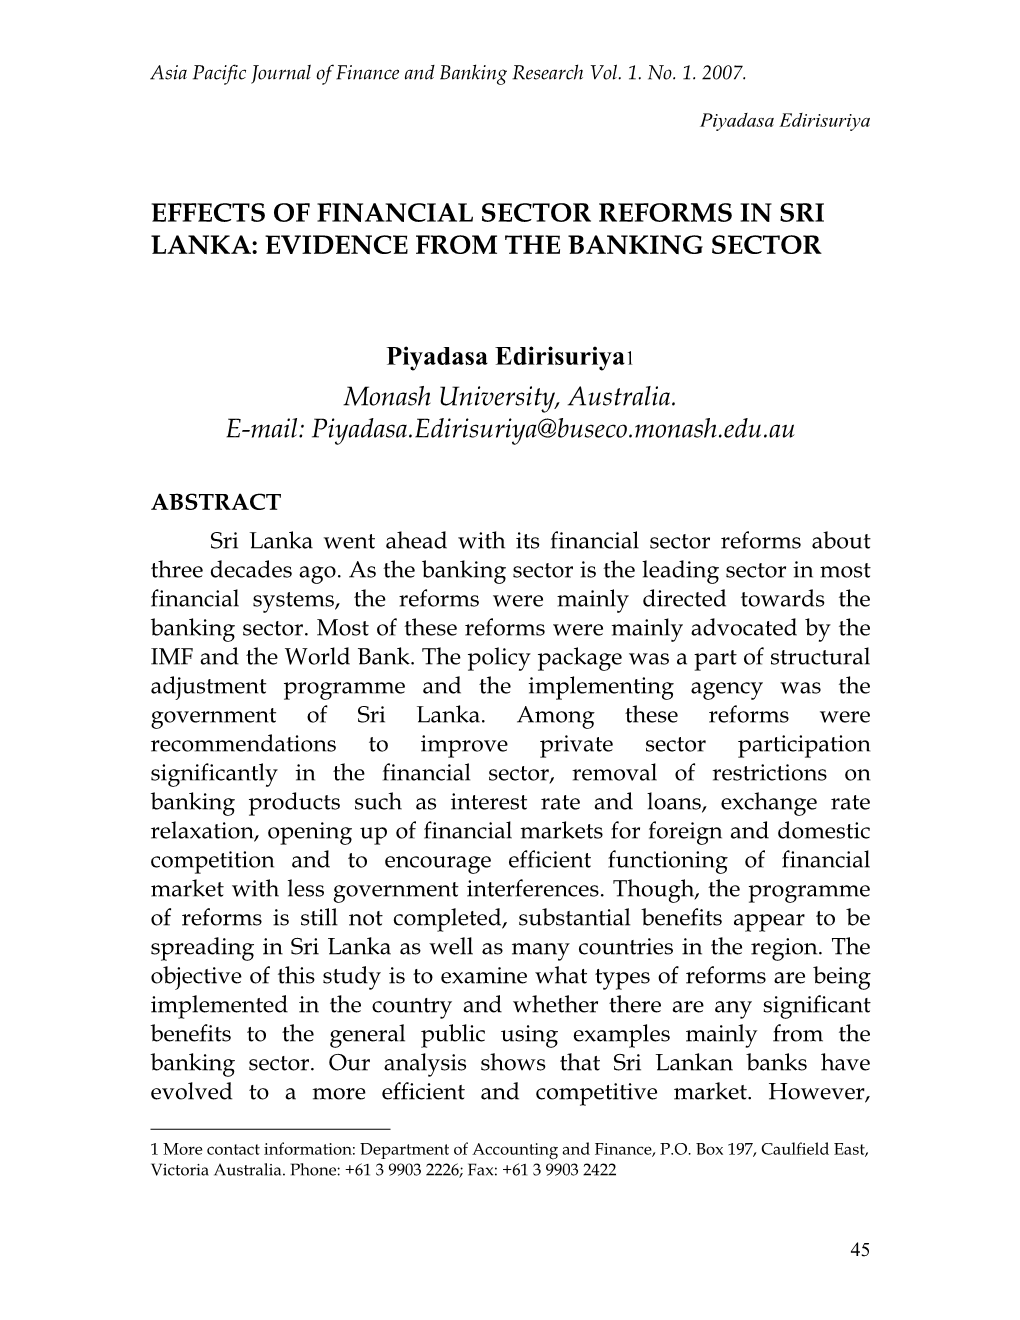 Effects of Financial Sector Reforms in Sri Lanka: Evidence from the Banking Sector